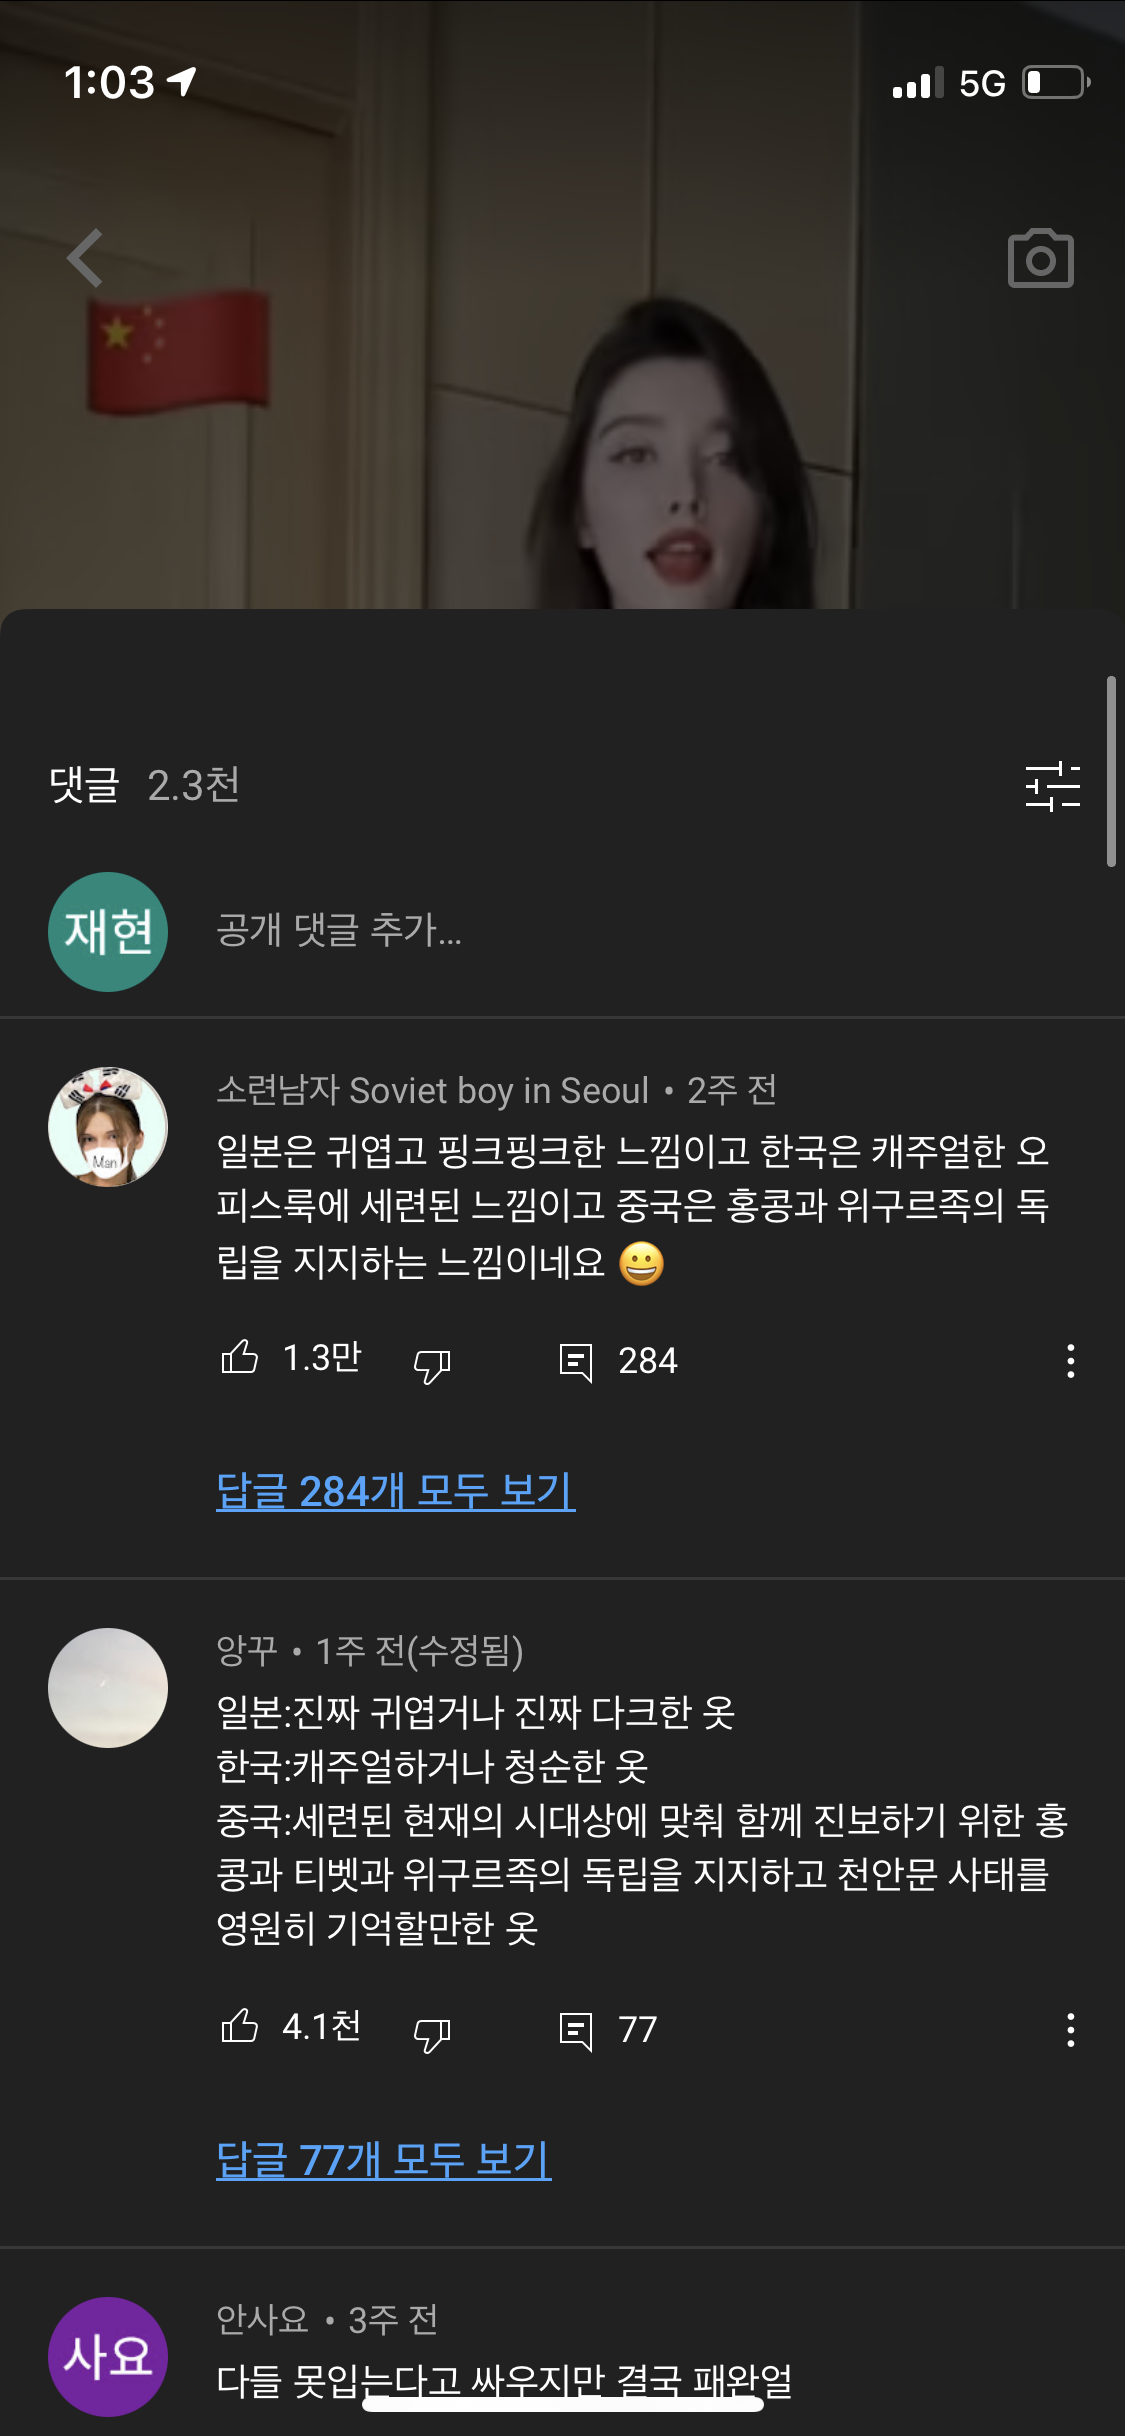 Comment on the video comparing styles of women's clothing between Korea, China and Japan